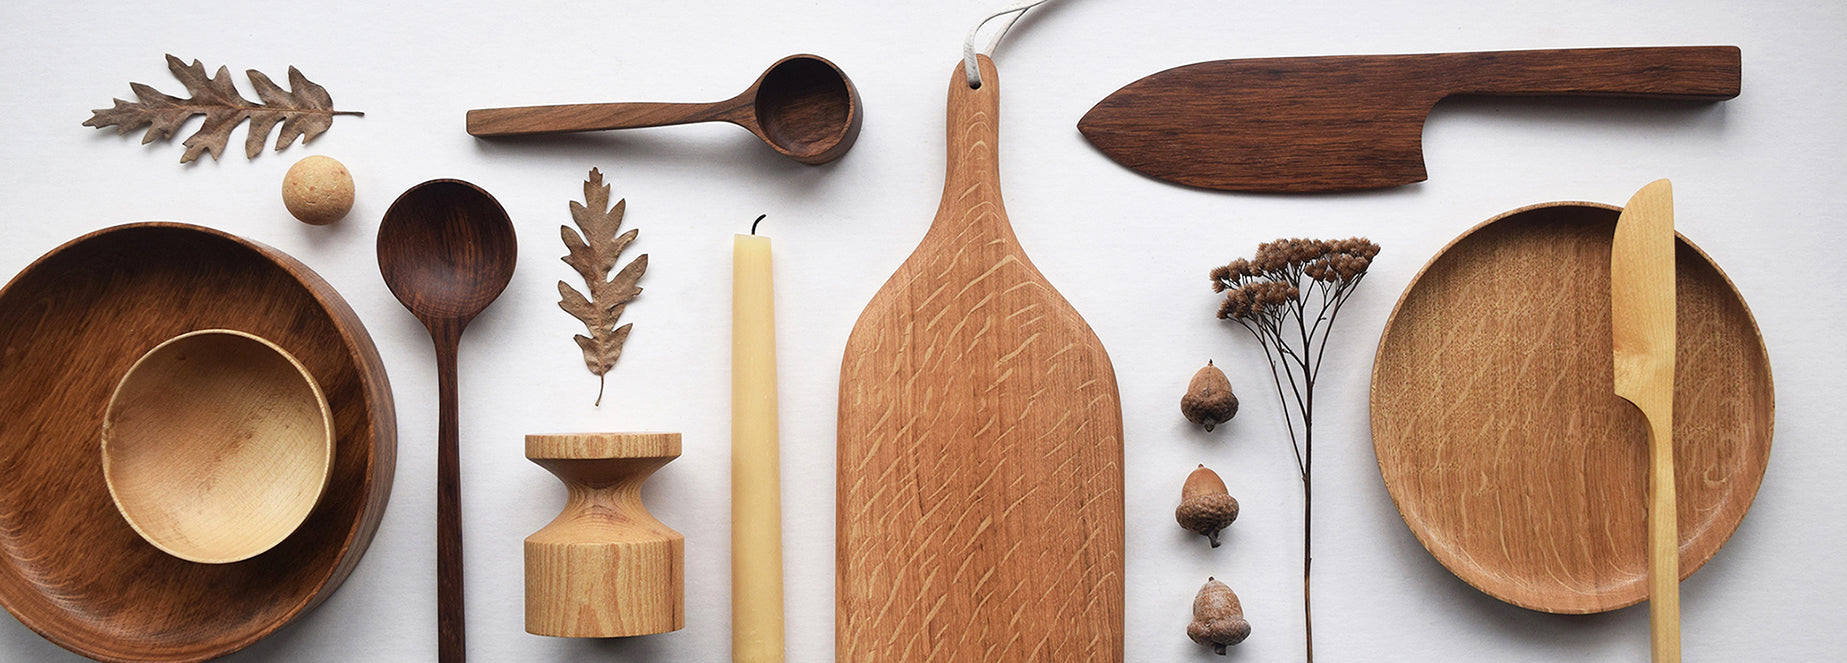 Contemporary wooden tableware and homeware handmade in Derbyshire from British-grown timbers by Sean and Ellie from Selwyn House. 